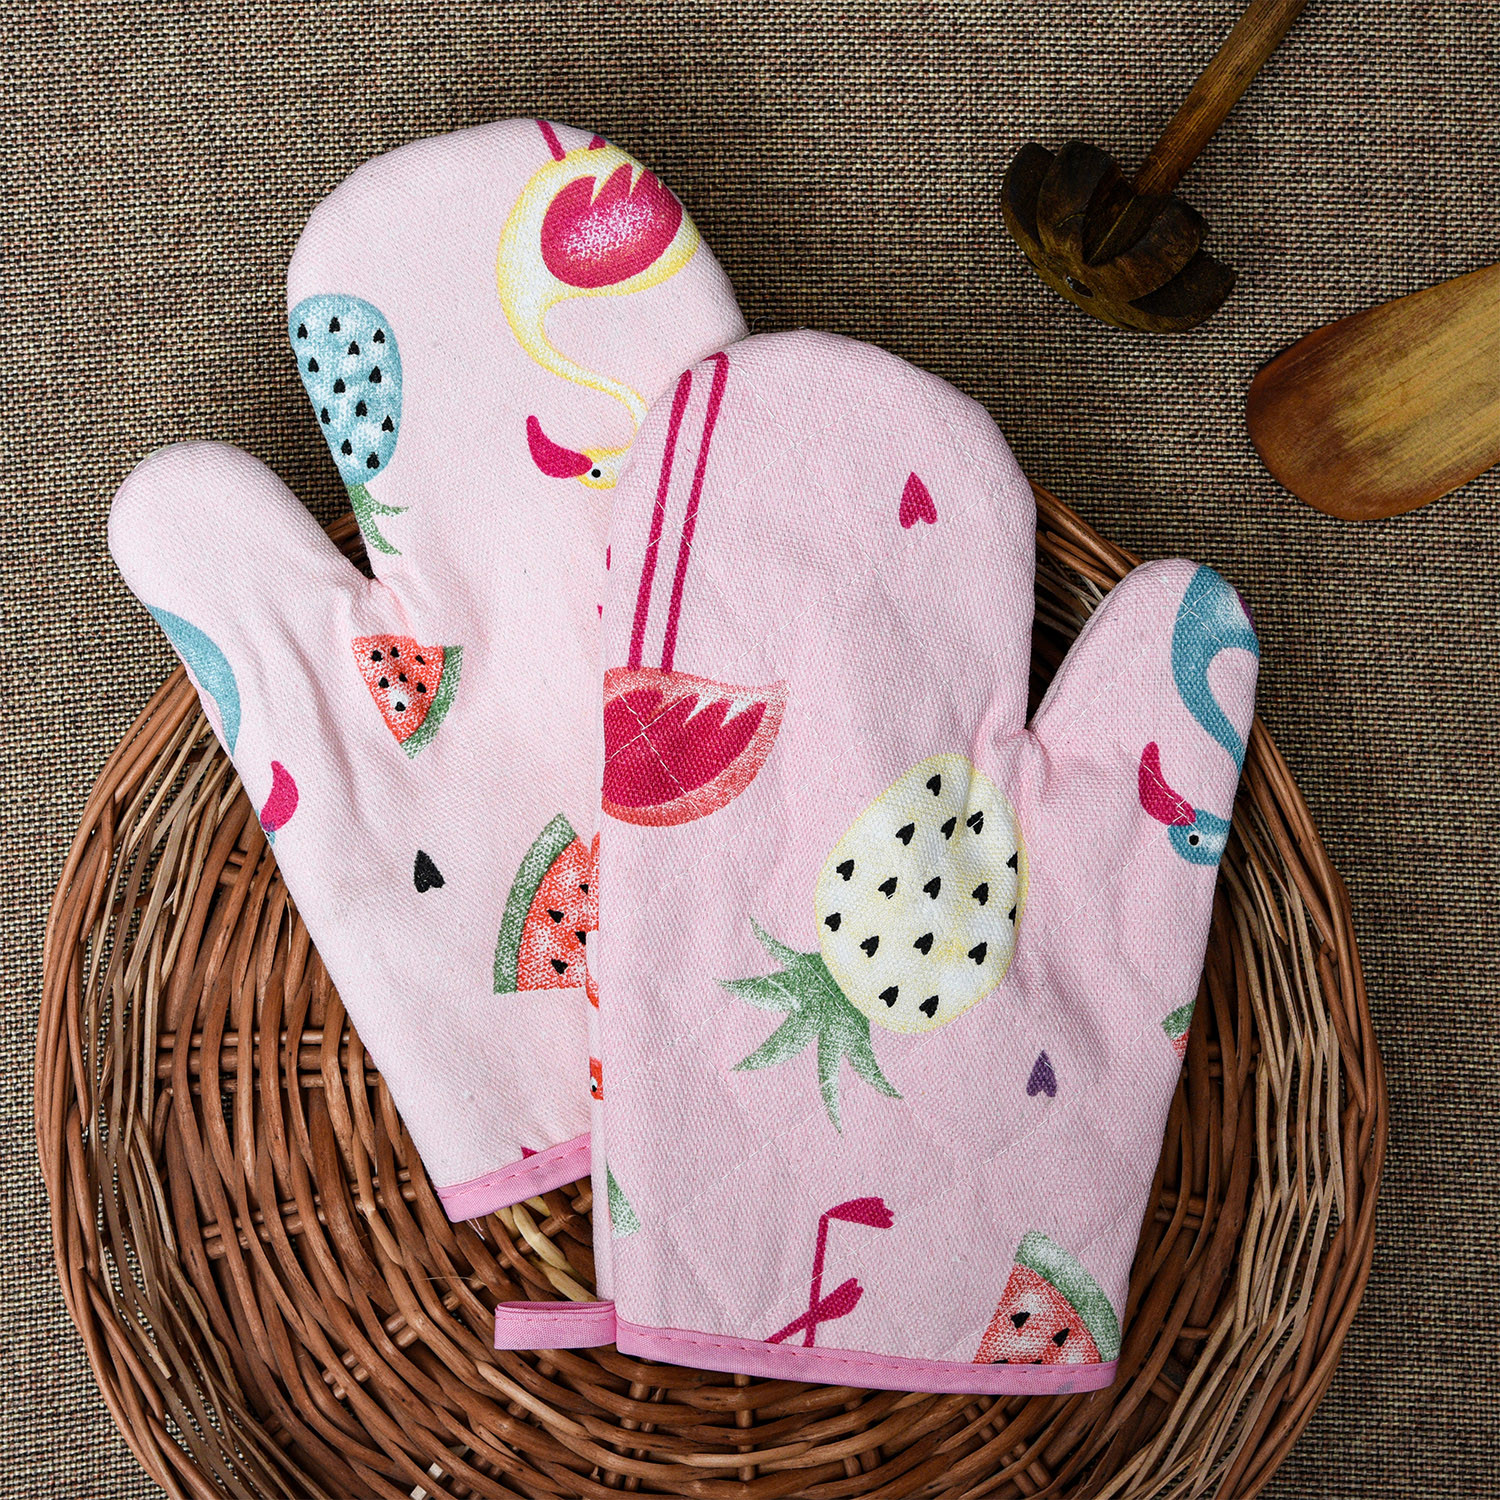 Kuber Industries Oven Mitts|Cotton Microwave Oven Insulated Gloves|Duck Print Hanging Loop Kitchen Oven|Heat Resistant|Microwave Gloves For Kitchen|1 Pair (Pink)